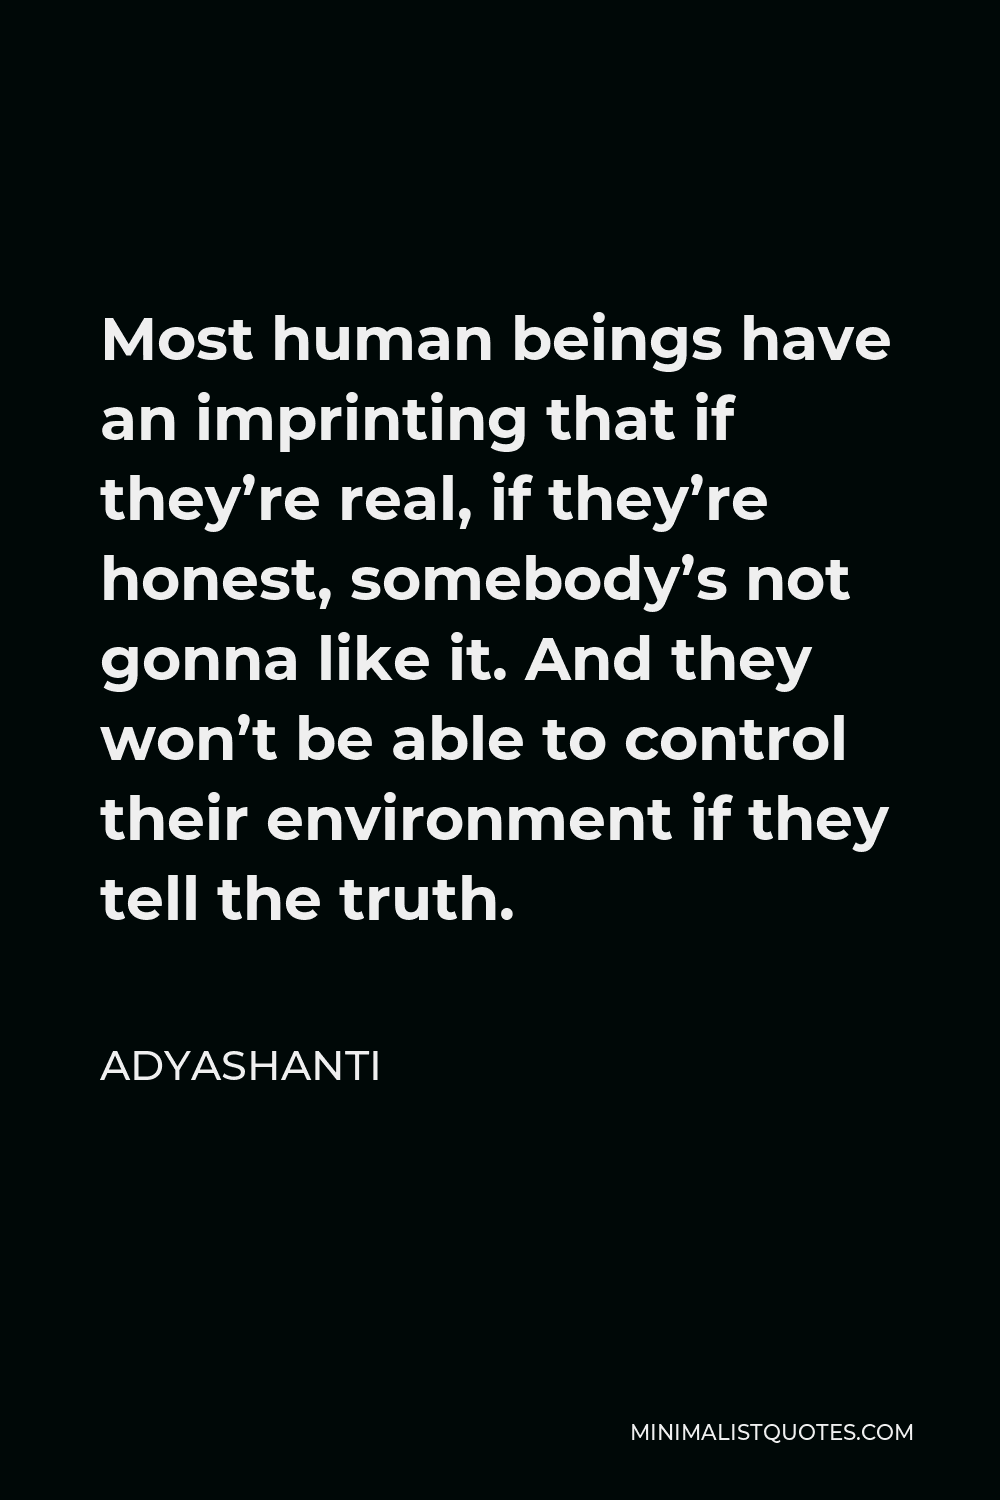 Adyashanti Quote - Most human beings have an imprinting that if they’re real, if they’re honest, somebody’s not gonna like it. And they won’t be able to control their environment if they tell the truth.